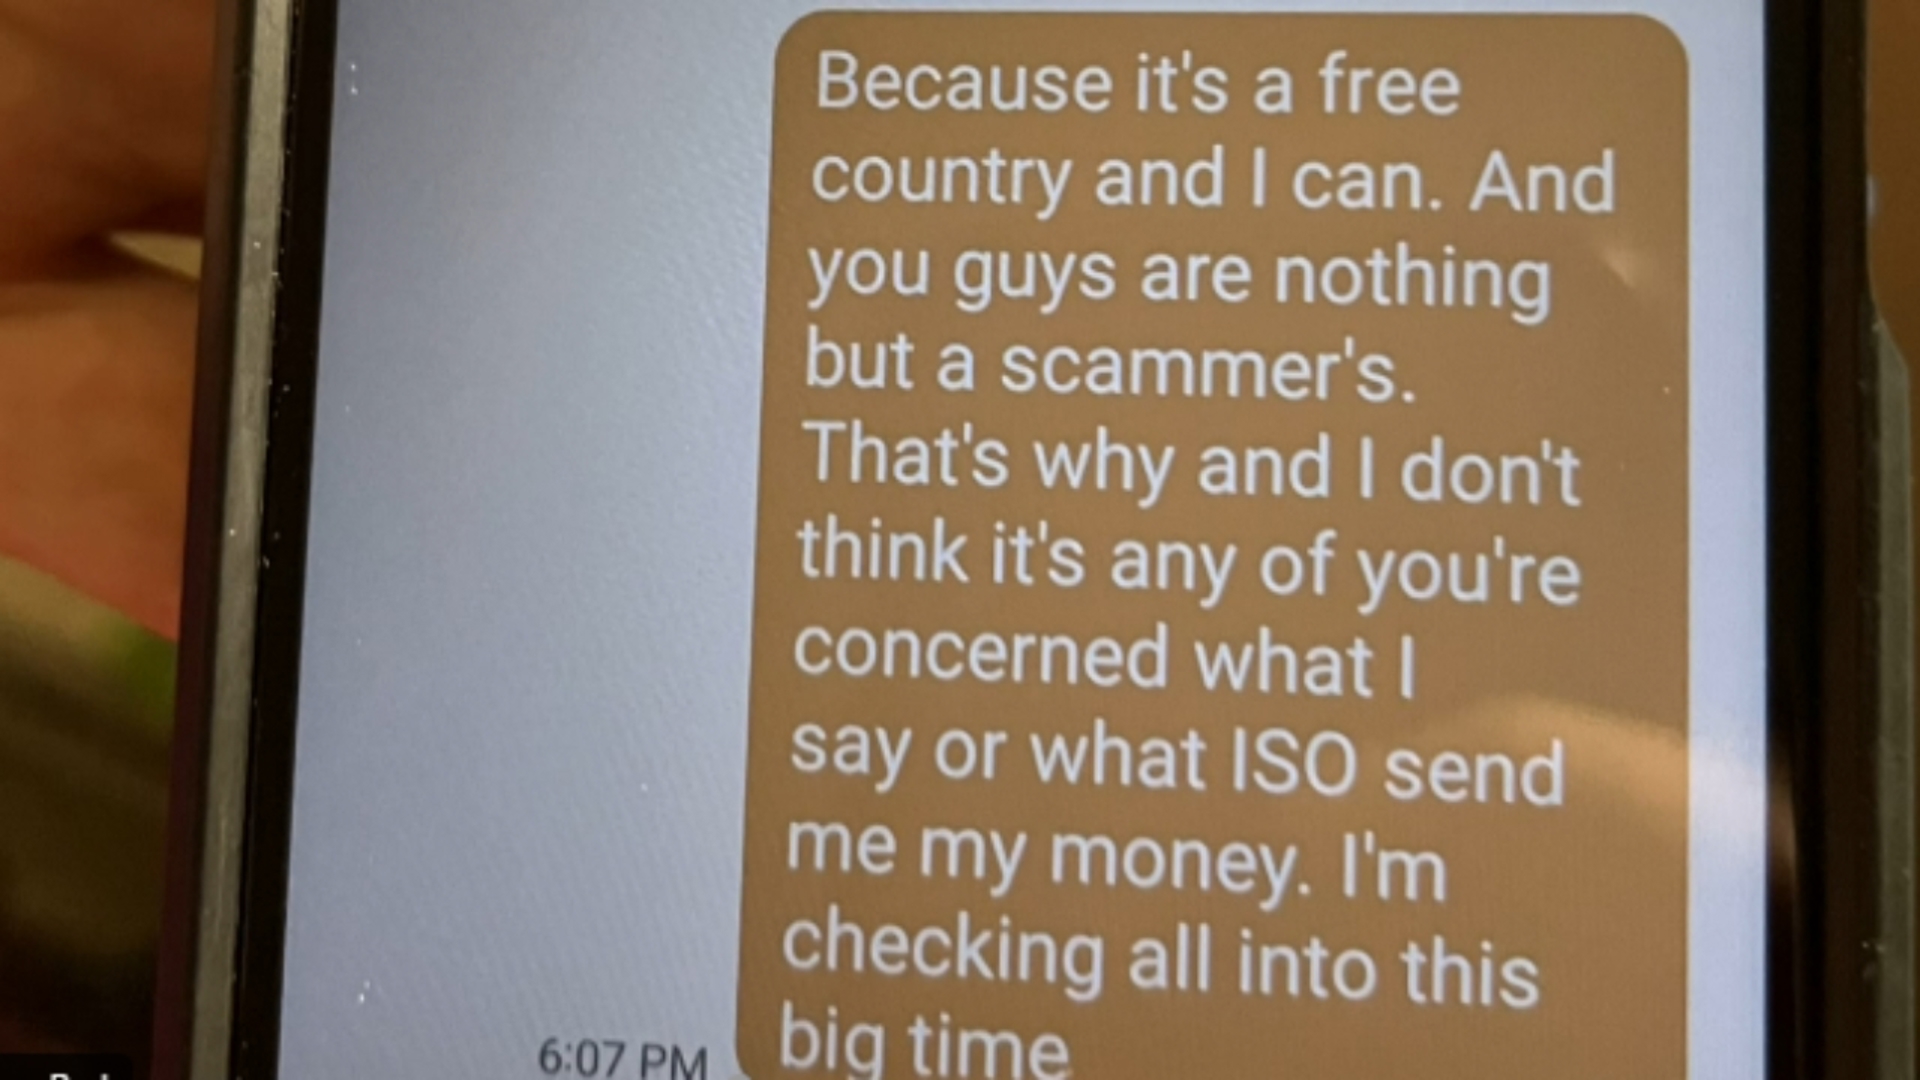 It started with a phone call. It spiraled into a complex scam that left $1.06 in her bank account at the end of the month.